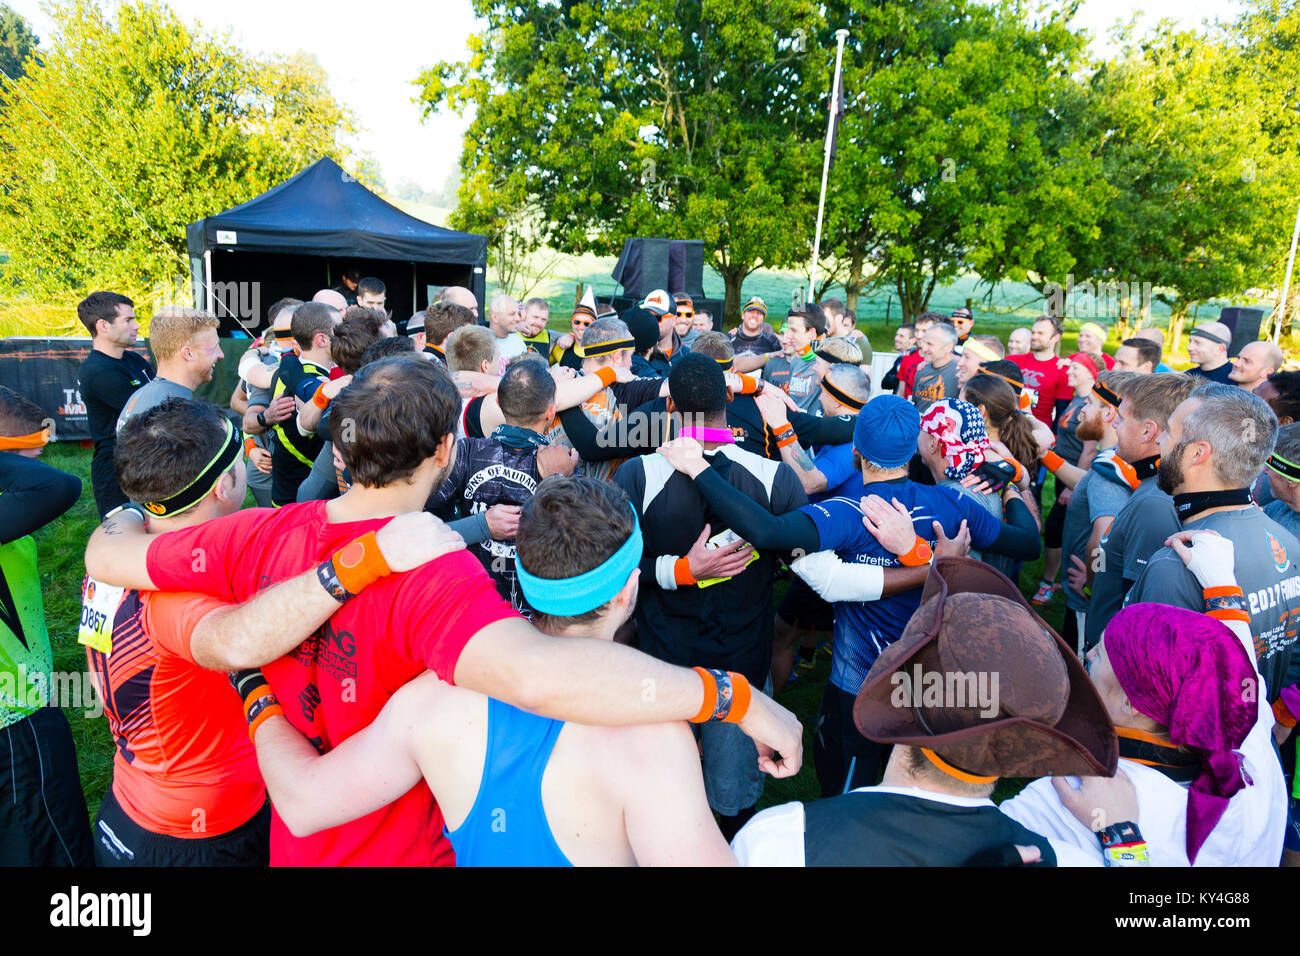 Sussex, UK. A large group of people embrace before they begin a Tough Mudder event. Stock Photo